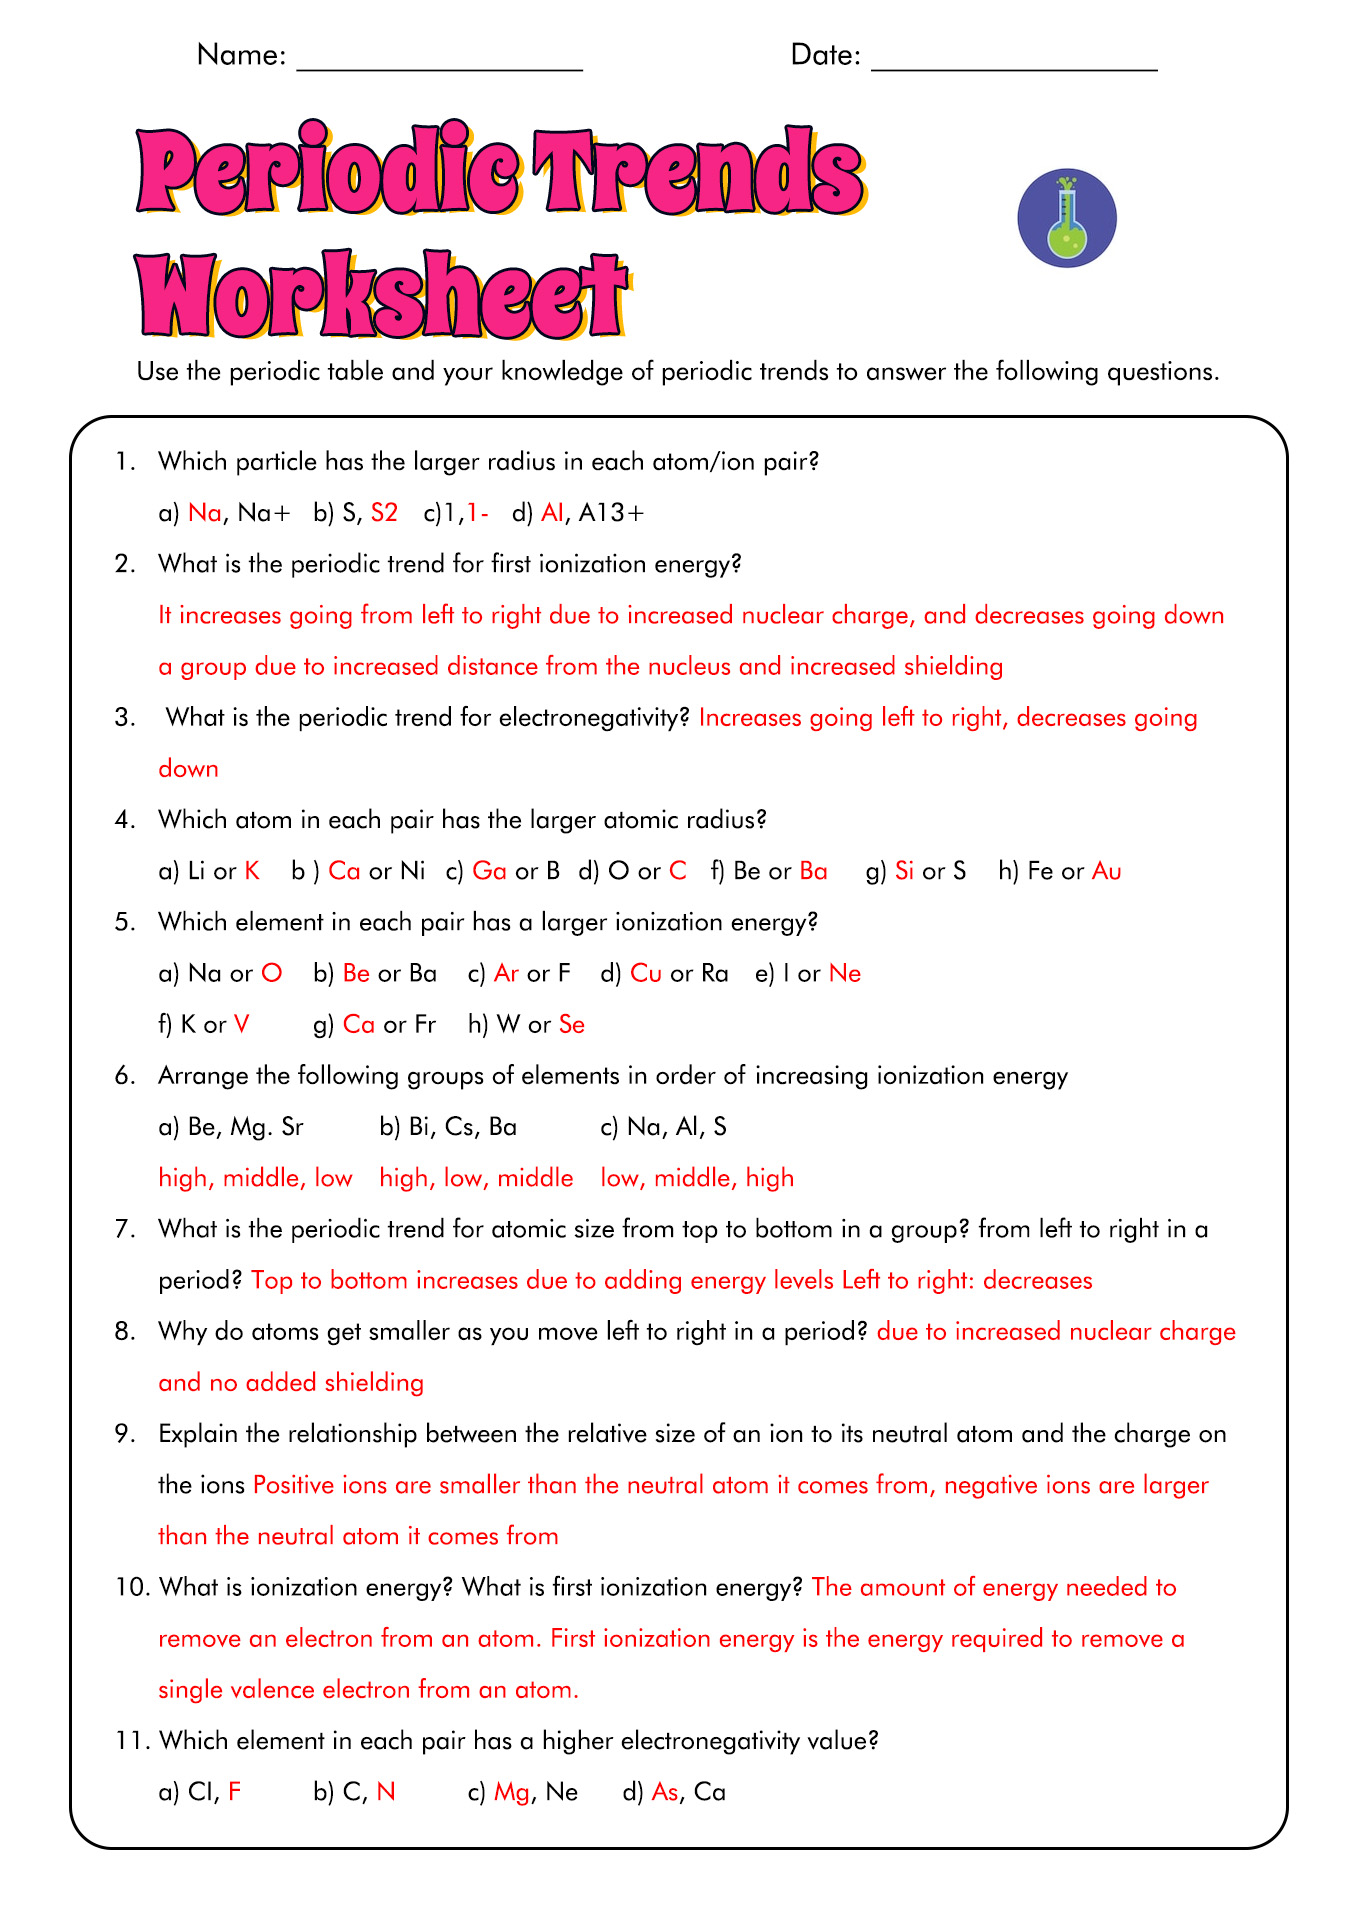 10-best-images-of-periodic-table-word-search-worksheet-periodic-table-trends-worksheet-answers